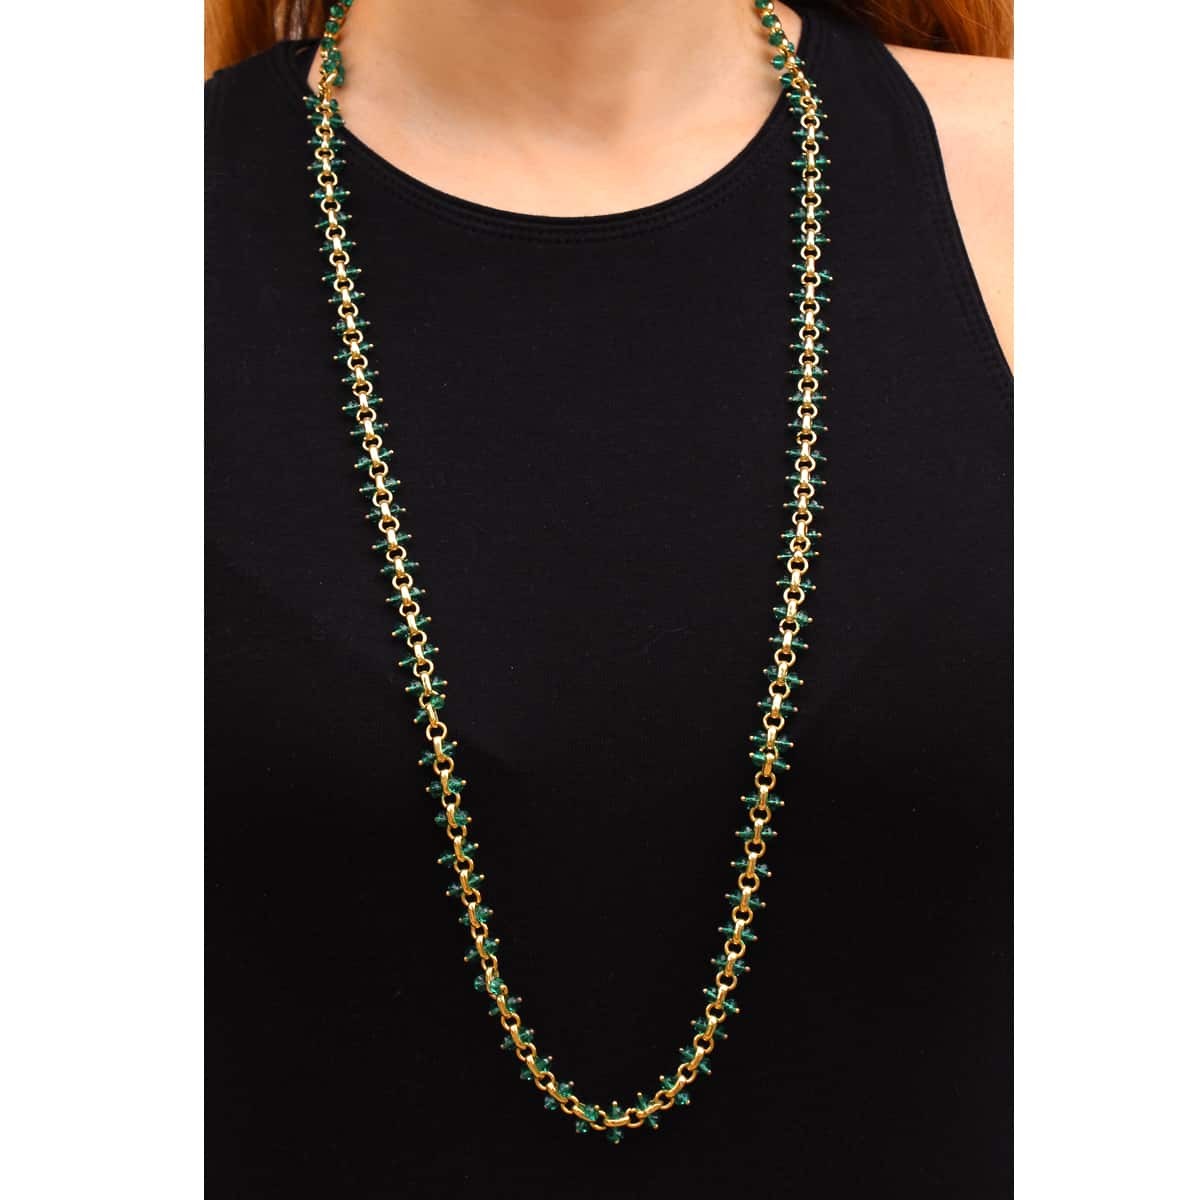 Collar cristal BCO634 mujer